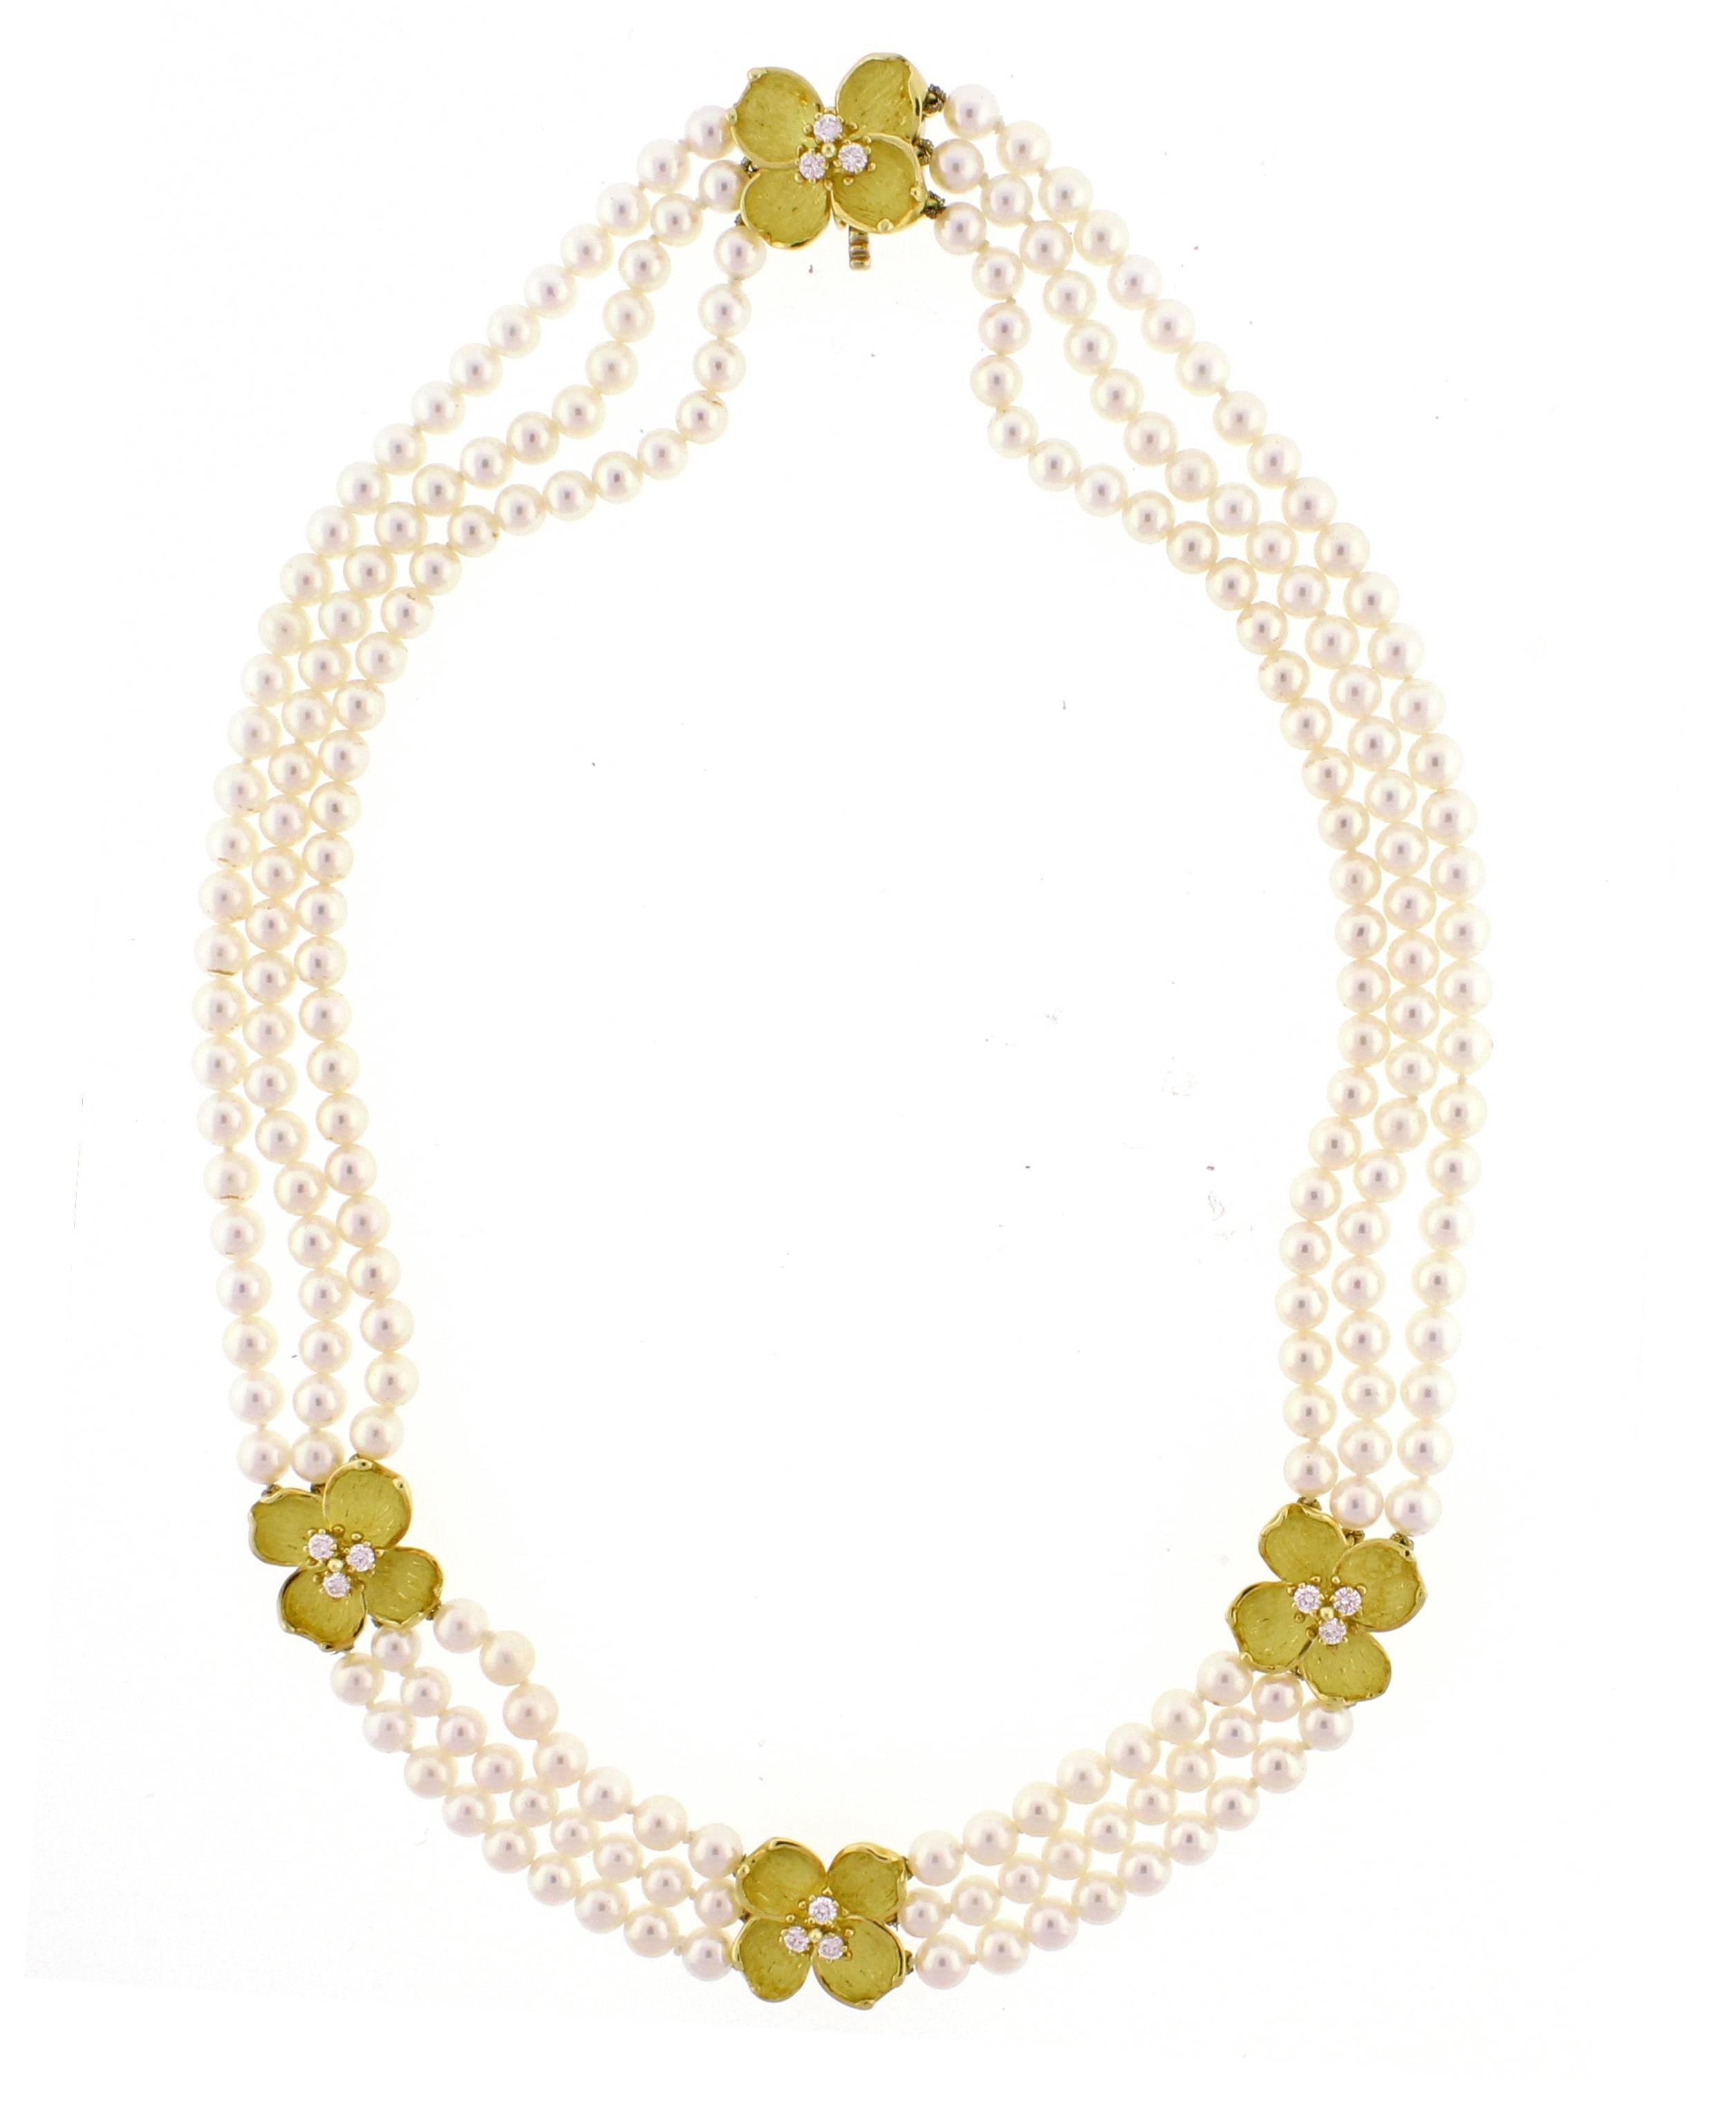 From Tiffany & Co. a pearl necklace and gold  necklace. The necklace is comprised of three strands of 4.5-5mm cultured pearls. Three 18 karat yellow  gold and diamond dogwood motifs highlight the necklace along with a matching clasp. 12 briiliant